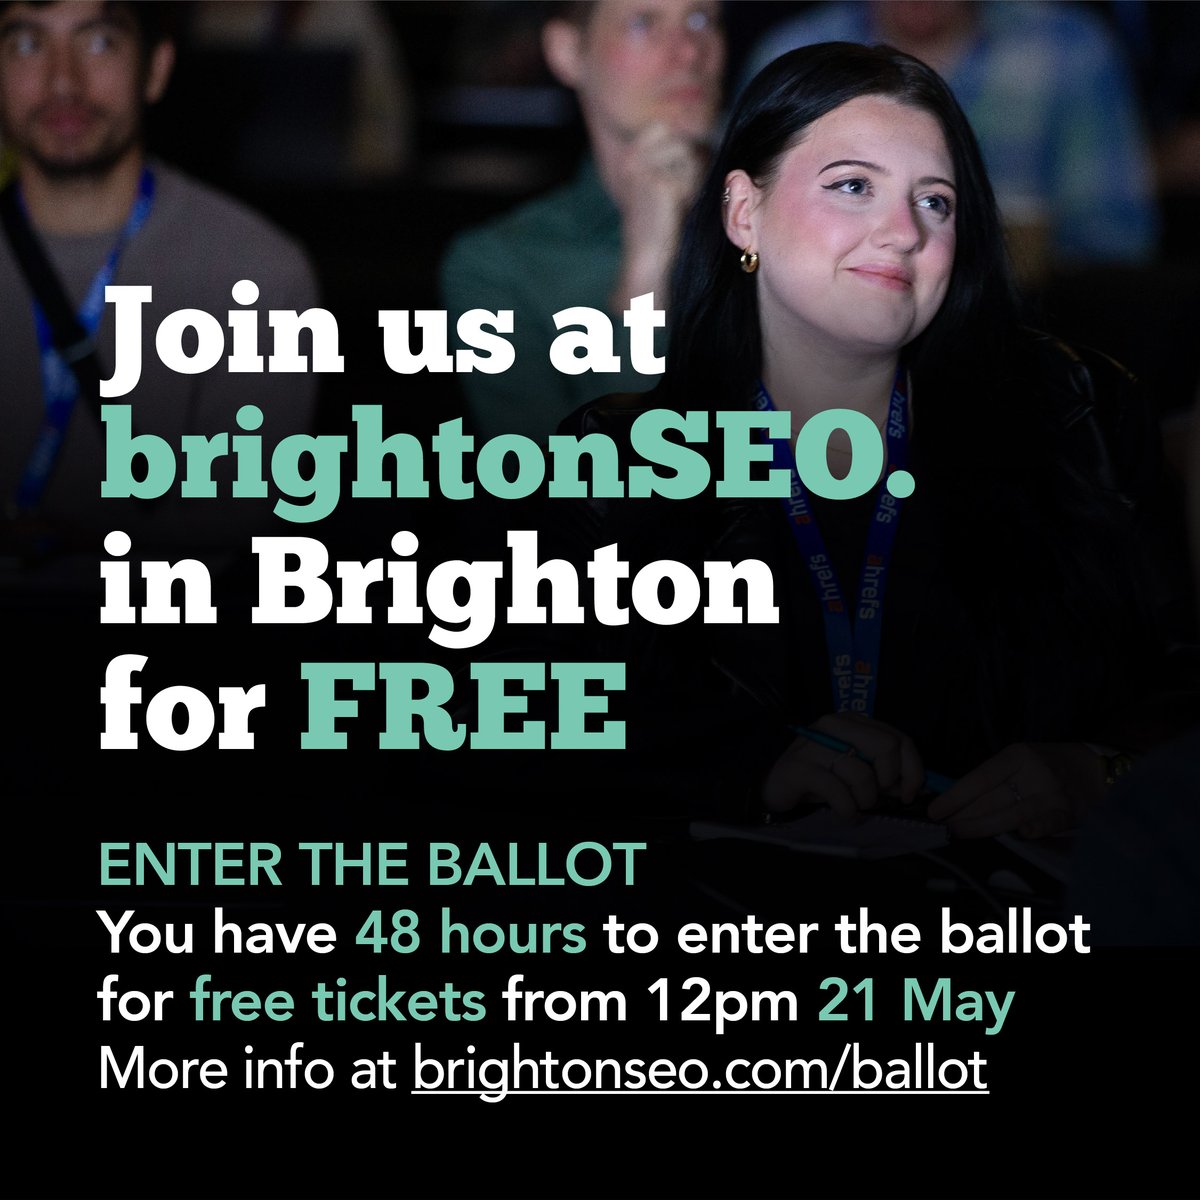 Don't miss out on the #brightonSEO ballot. If you want a free ticket to October's conference you need to enter your details when the window opens for *48 hours* on Tuesday, May 21 at 12pm. Save the date! addevent.com/event/hR213590…